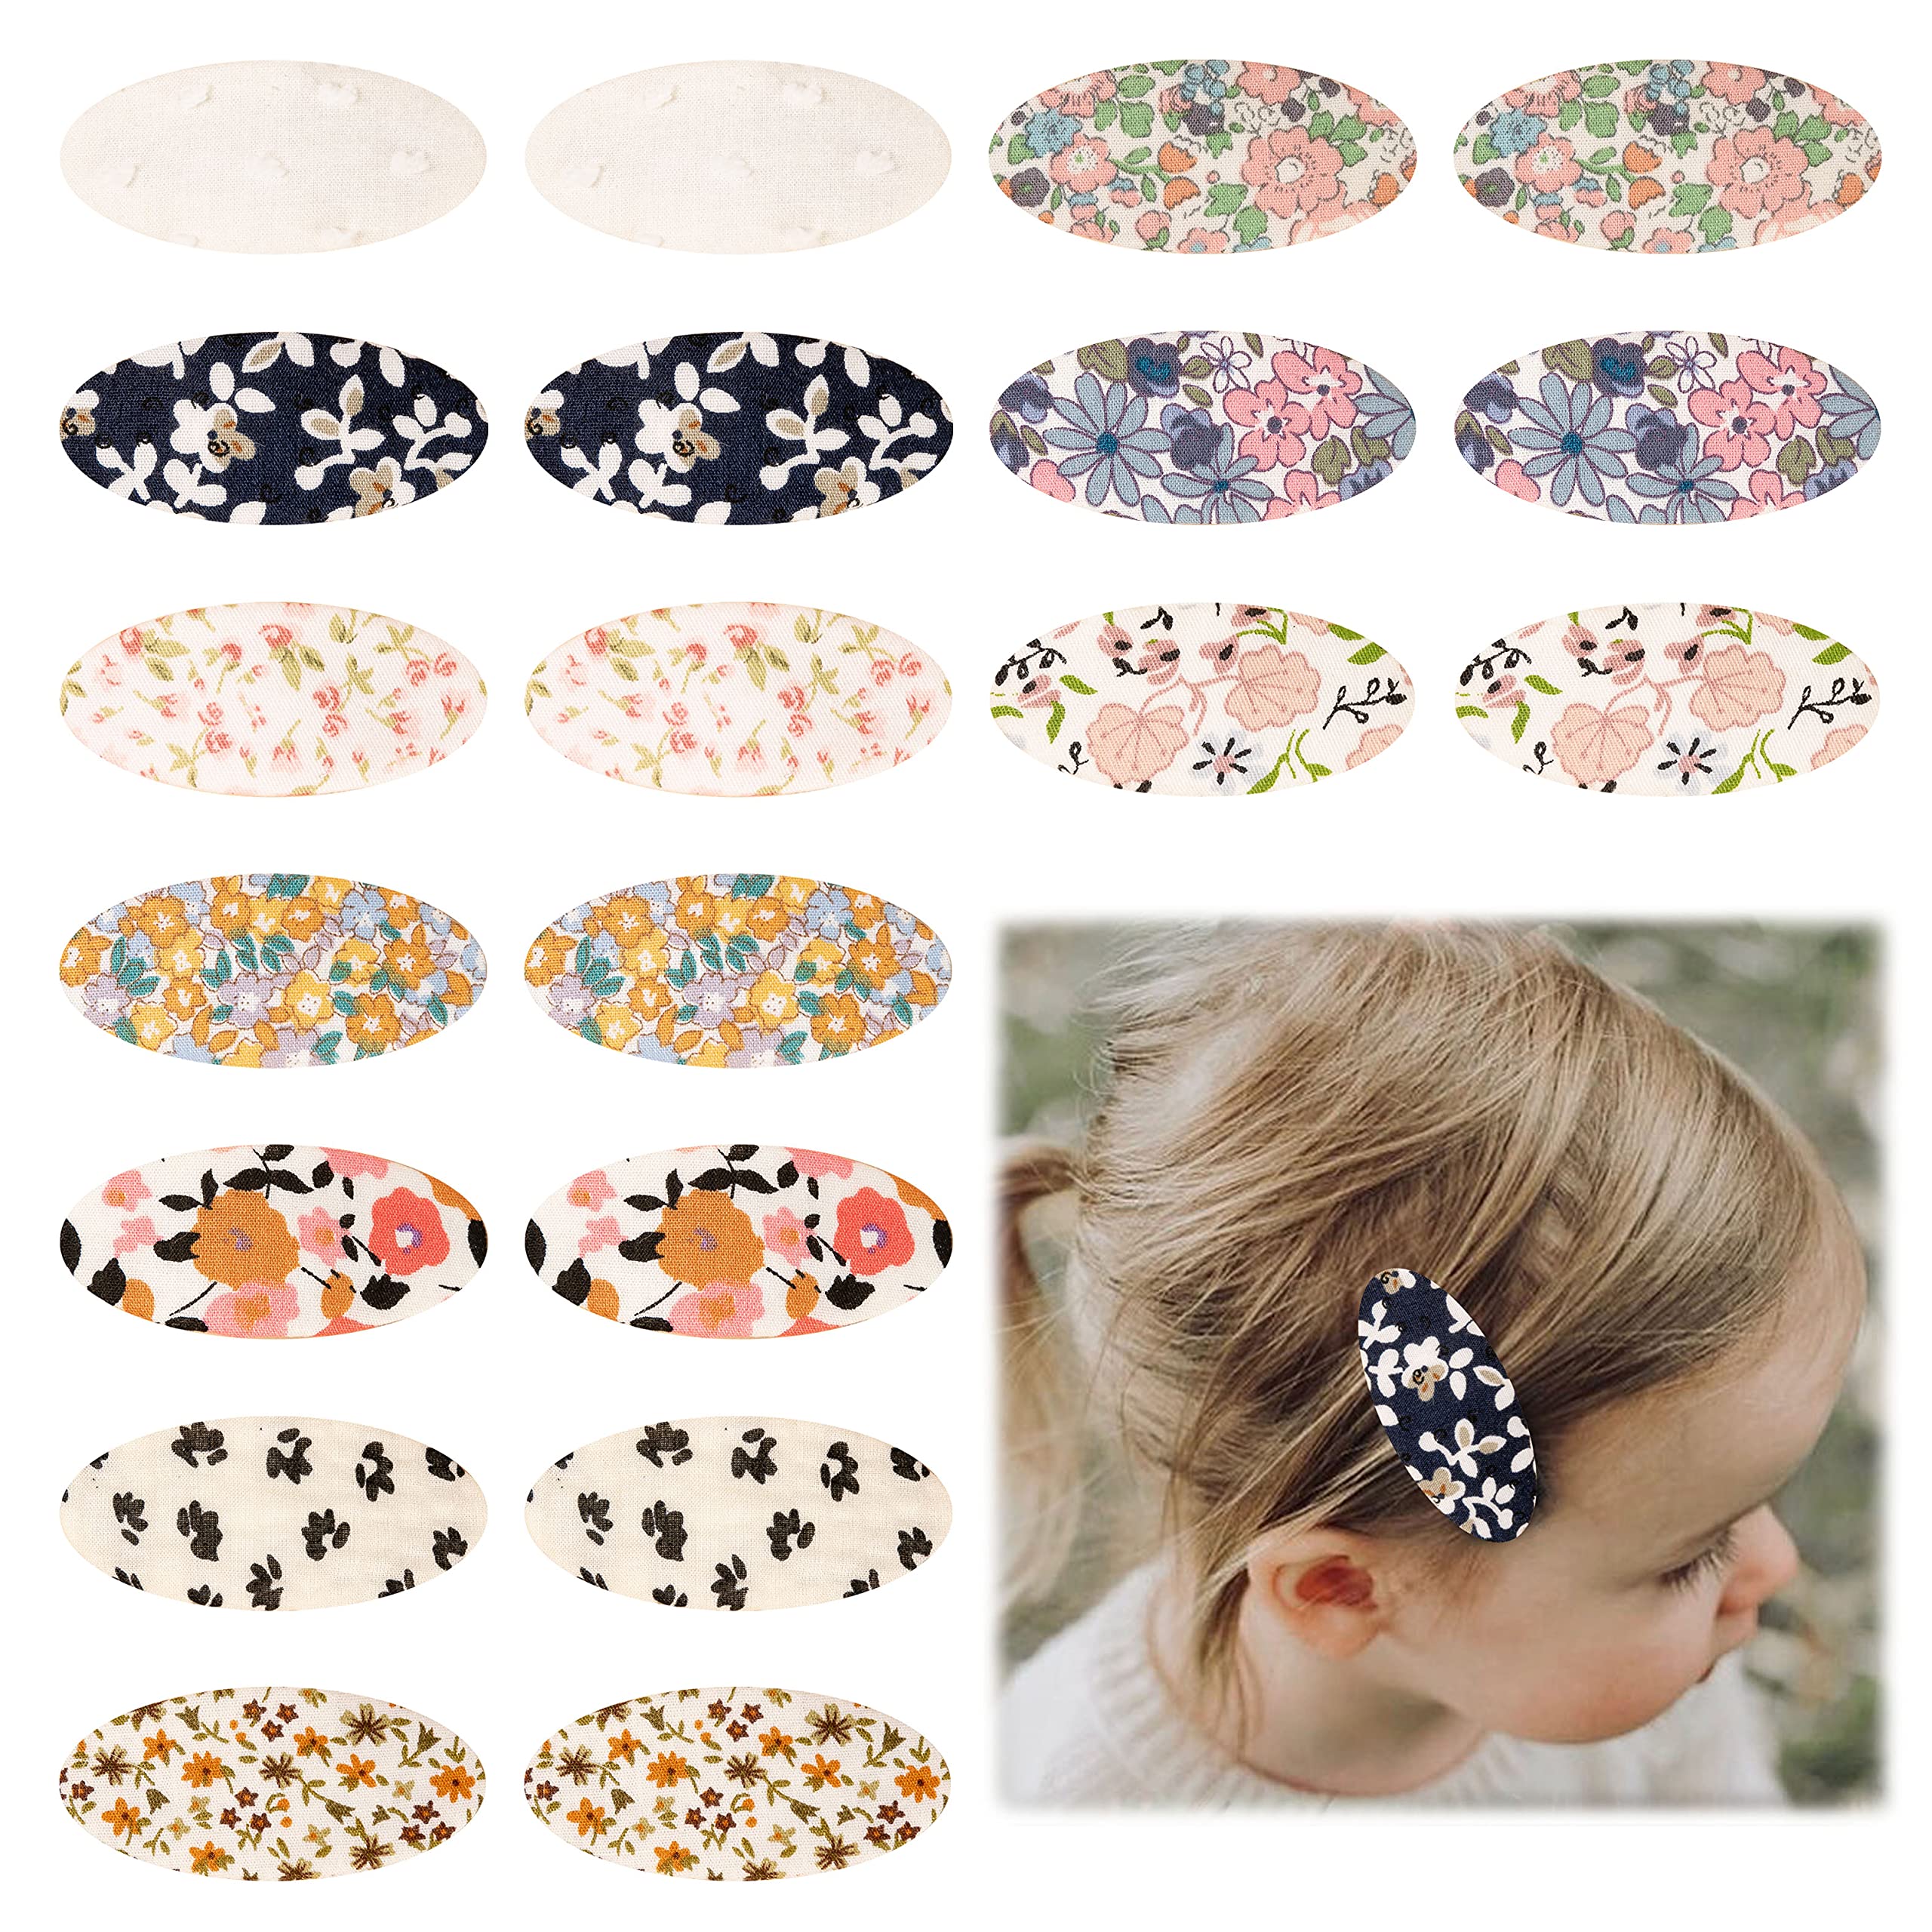 Snap Hair Clips Hair Barrettes for Girls, Anezus 80 Pcs 2 Inch Non-Slip  Barrettes Hair Accessories for Girls, Women, Kids Teens or Toddlers